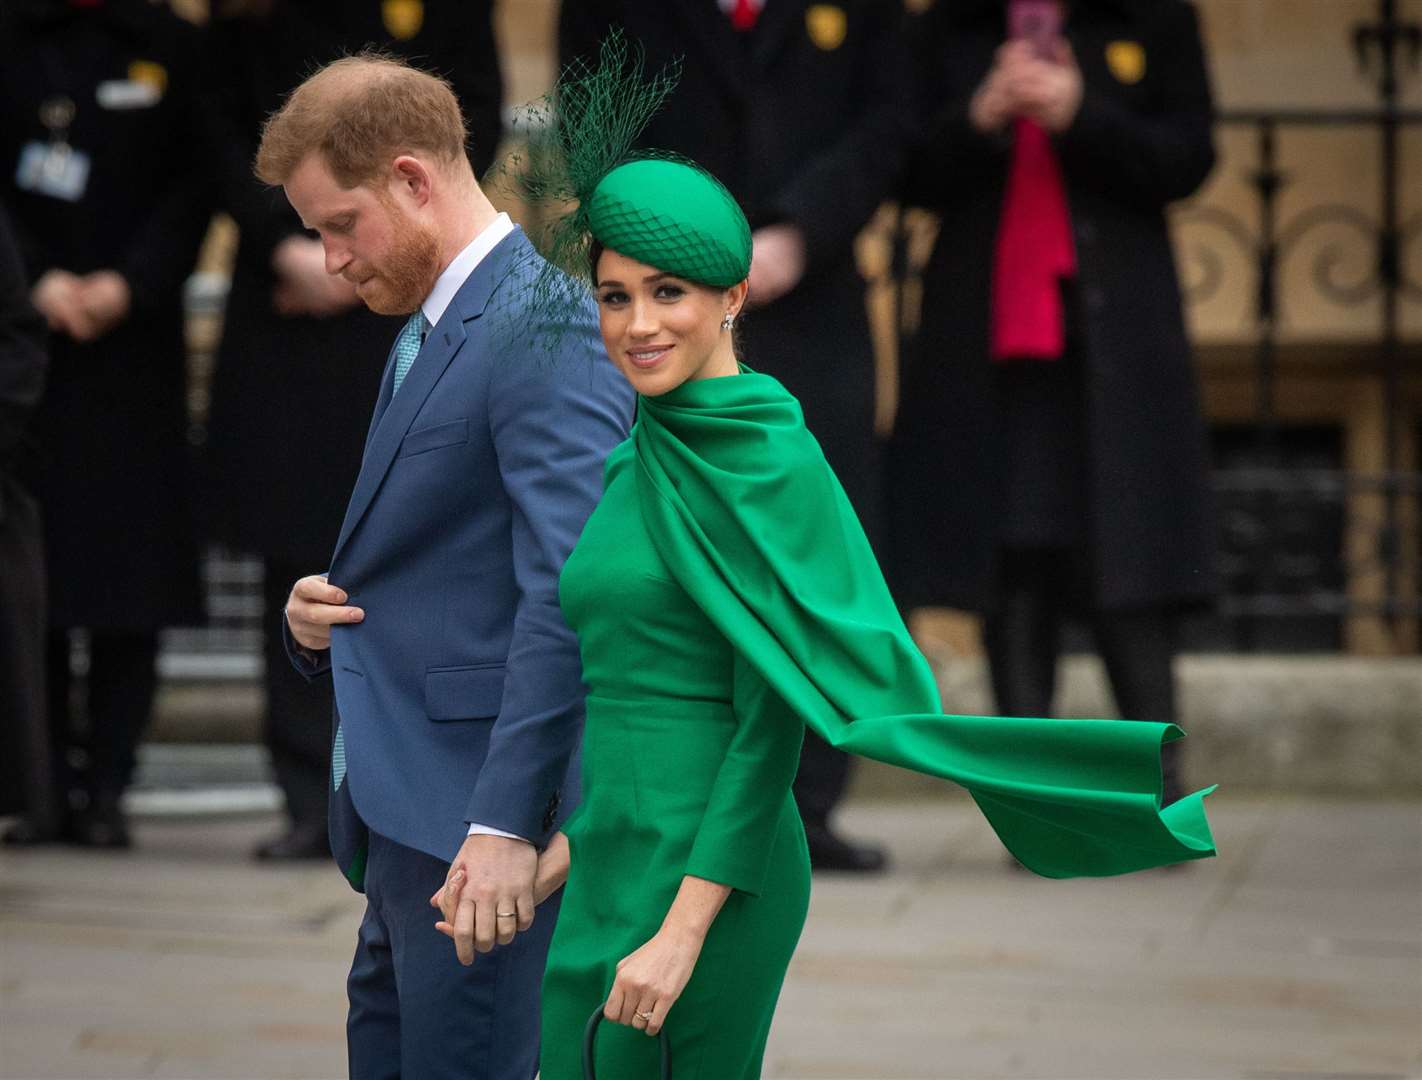 The Duke and Duchess of Sussex stepped down as senior working royals in March 2020 (Dominic Lipinski/PA)